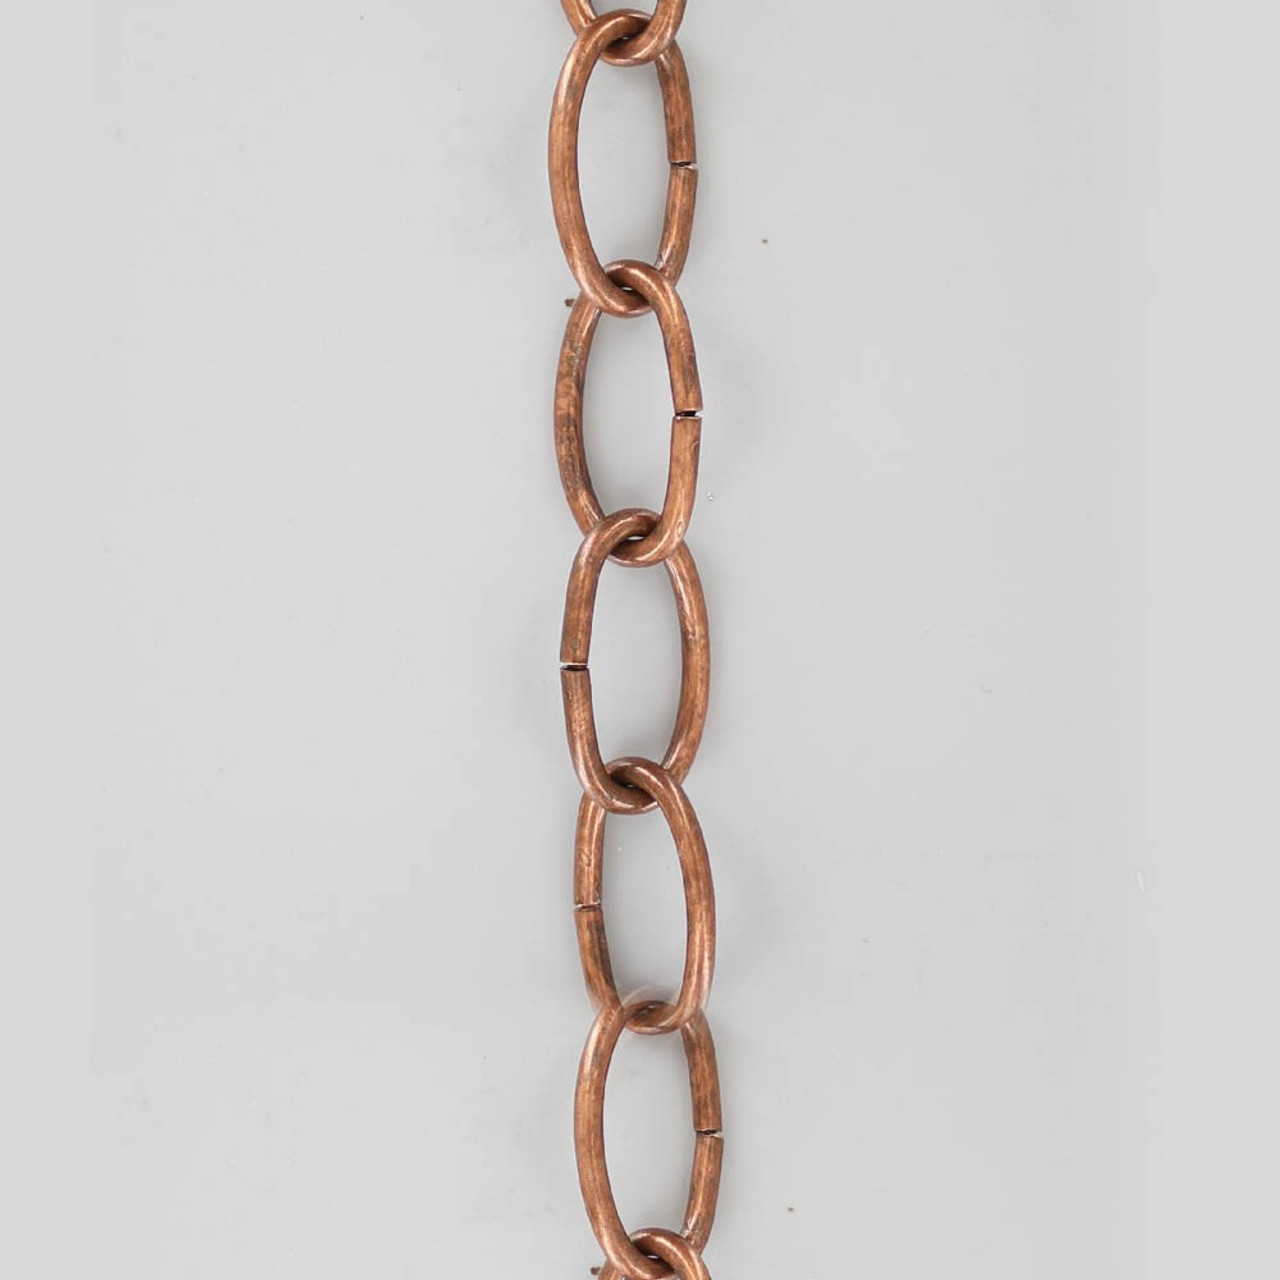 9 Gauge (1/8in.) Thick Steel Oval Lamp Chain - Antique Copper